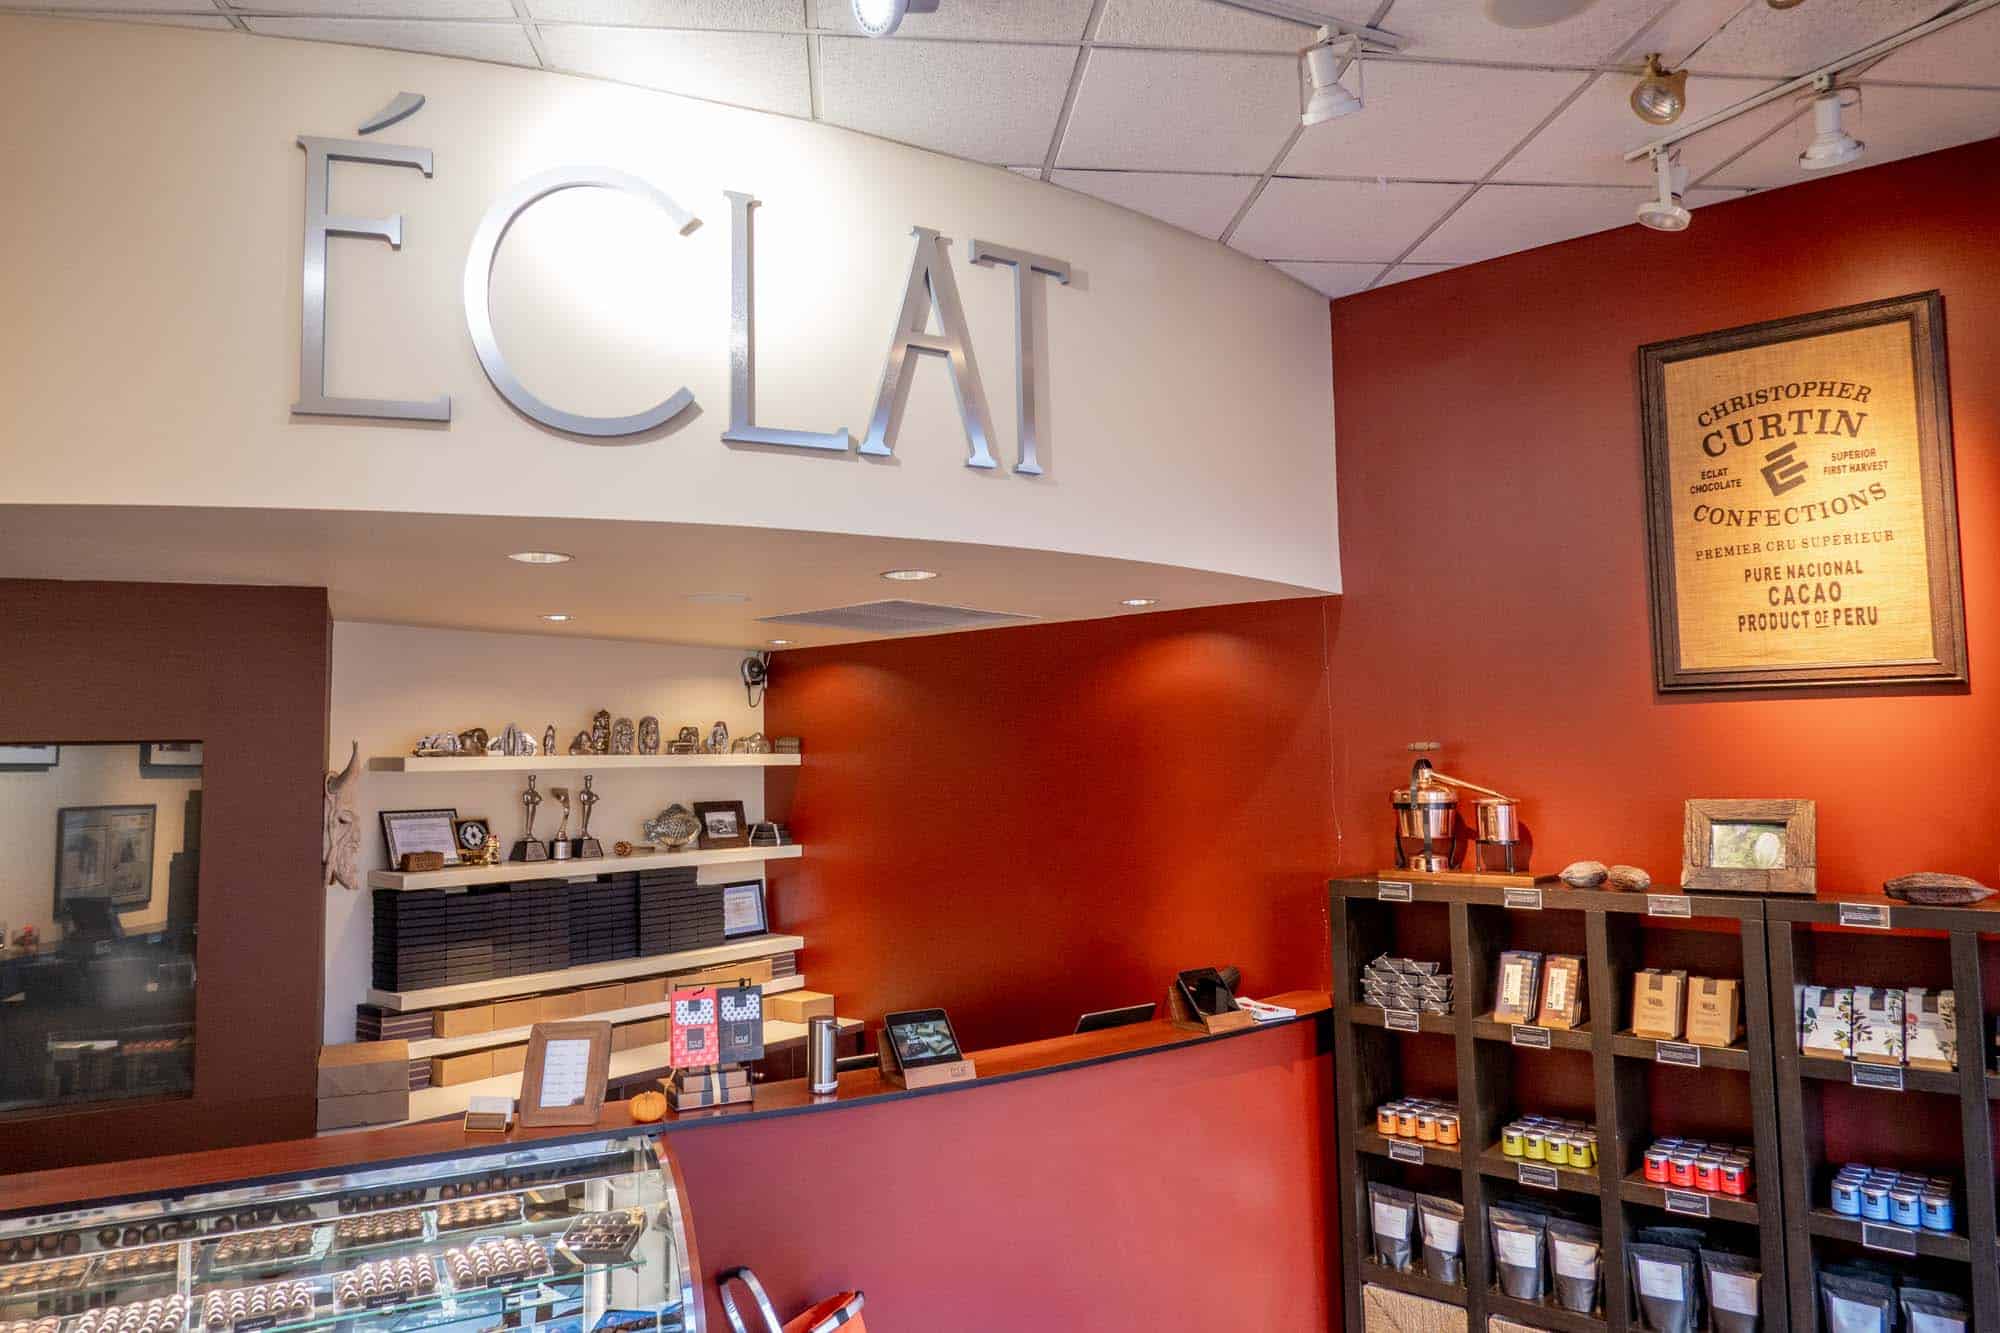 Interior of a chocolate store with red walls and a large silver sign: "Eclat"